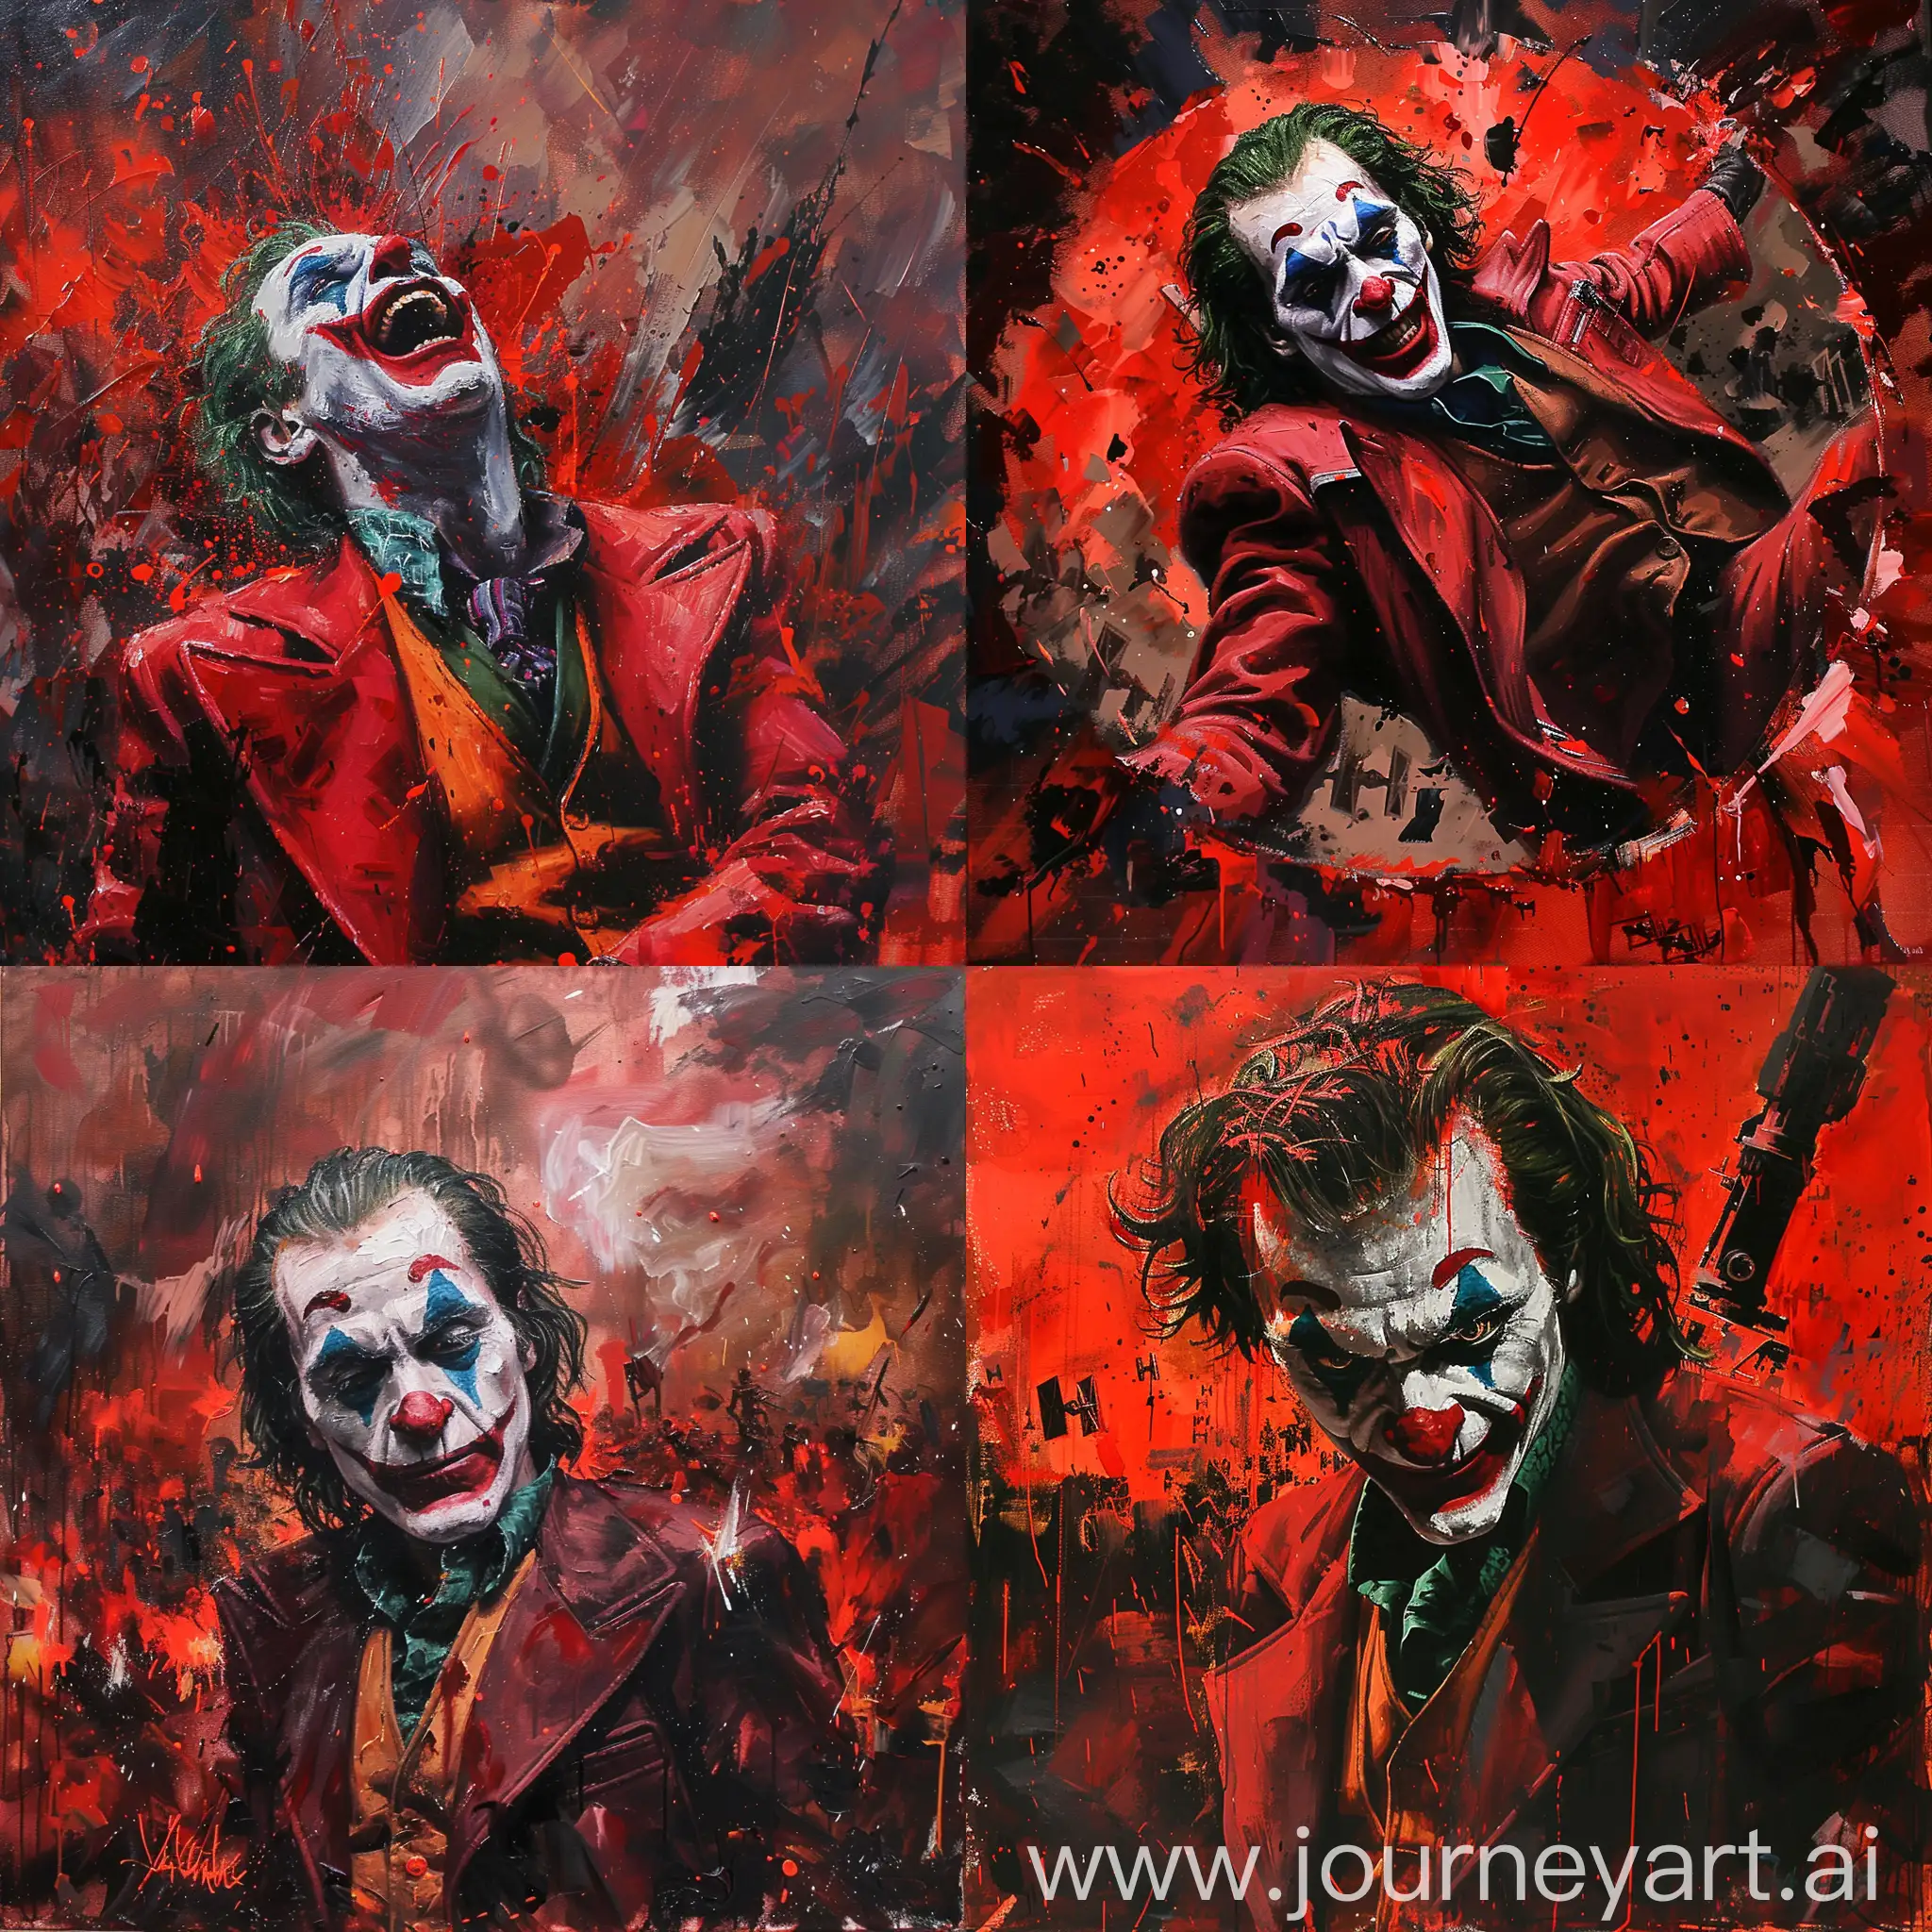 painting of joker in star wars style with bright red colour, dramatic scene, full of chaos 